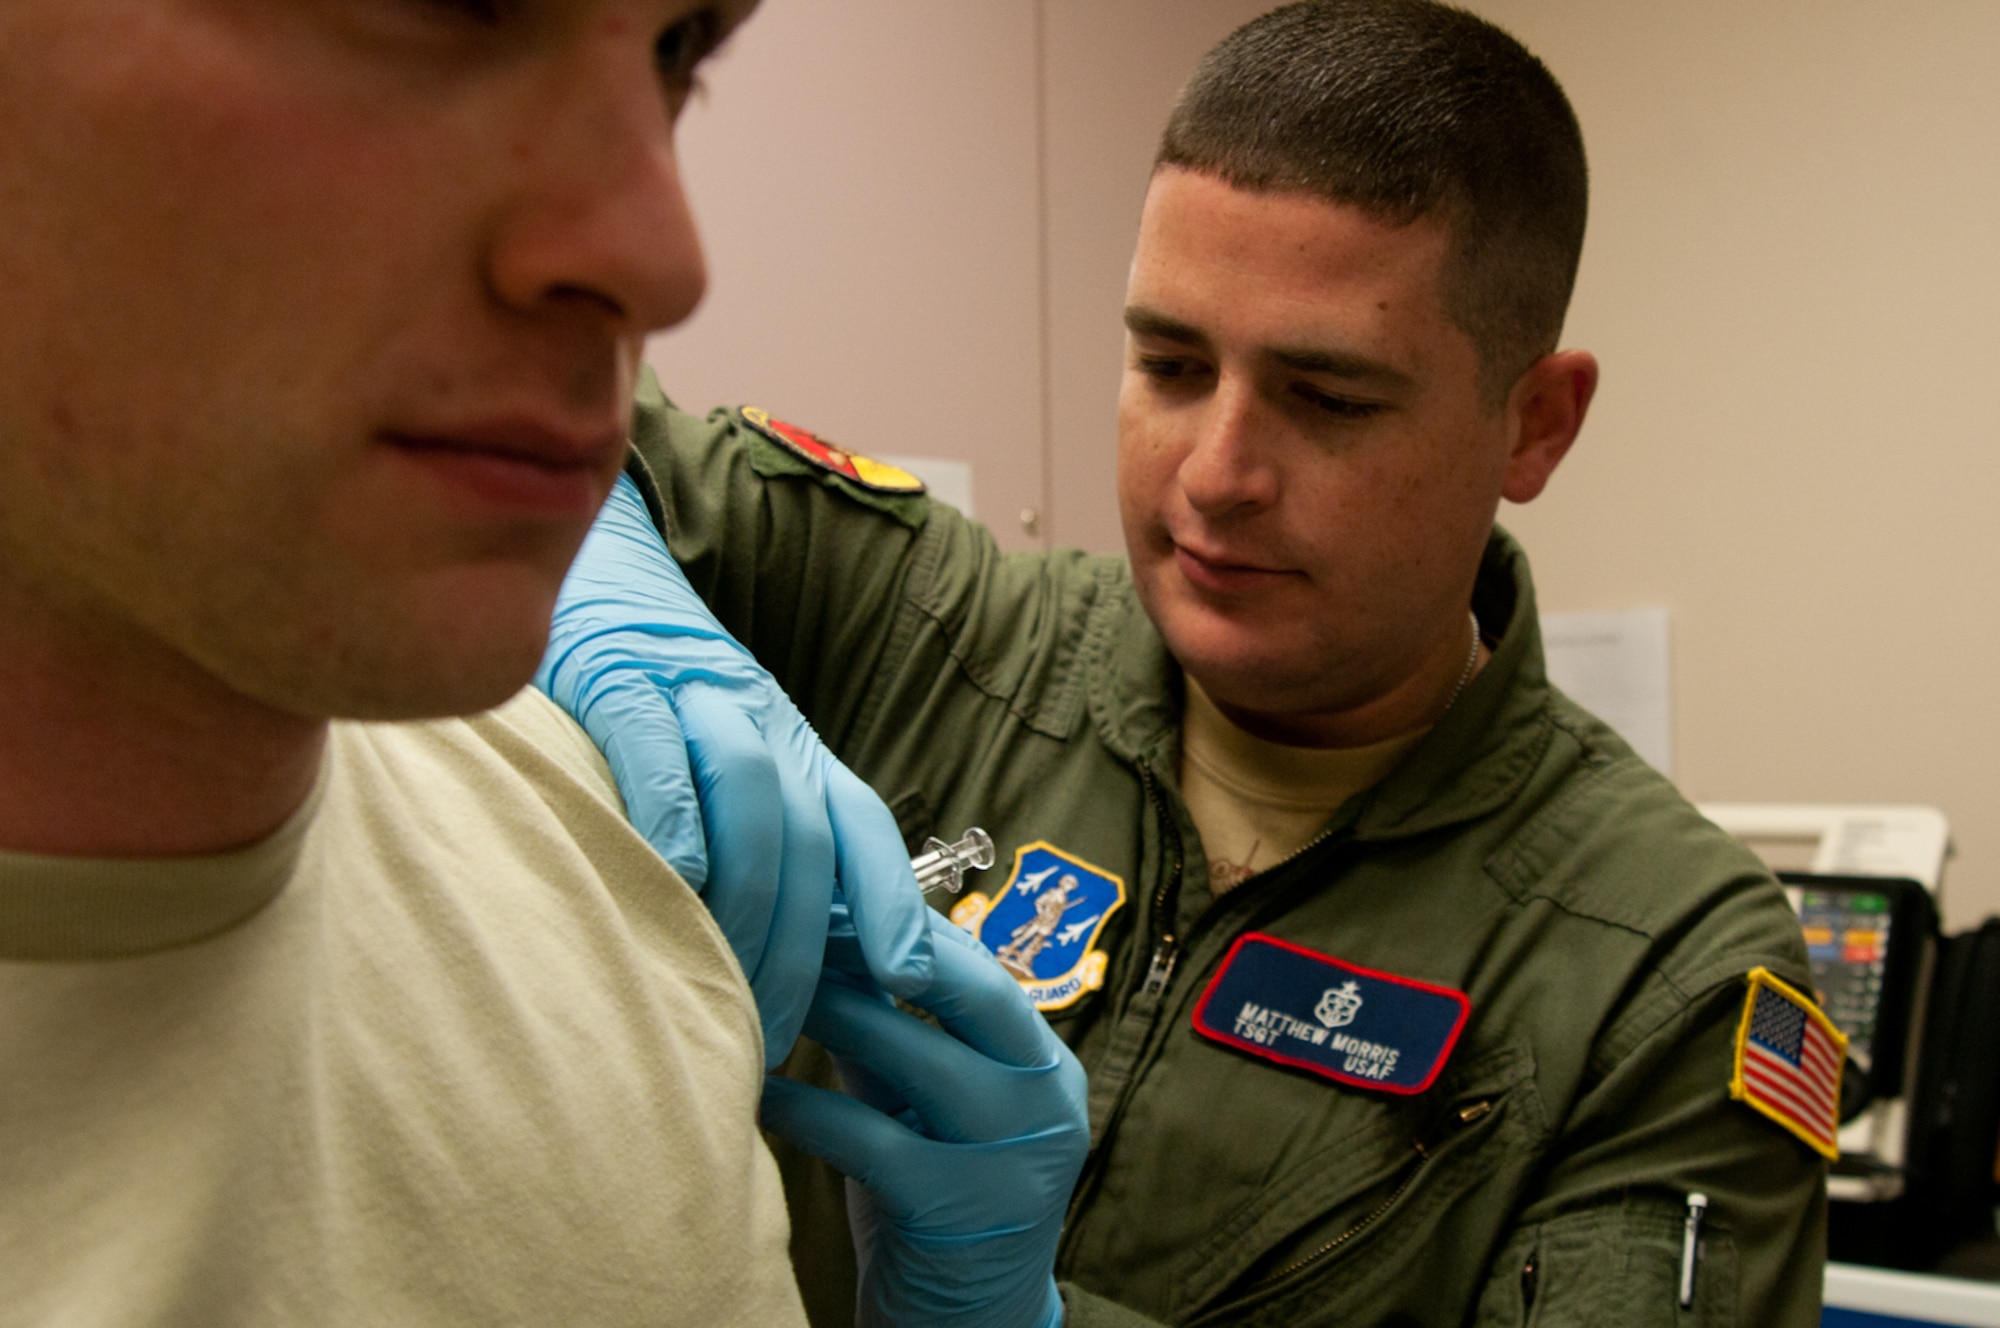 Master. Sgt. Matthew Morris, 139th Medical Group, administers an immunization to an Airman at the 139th Airlift Wing, St. Joseph, Mo., Dec. 3, 2011. Hundreds of Airmen have received the flu shot during the 2011-2012 flu season so far. (MIssouri Air National Guard photo by Senior Airman Kelsey Stuart)